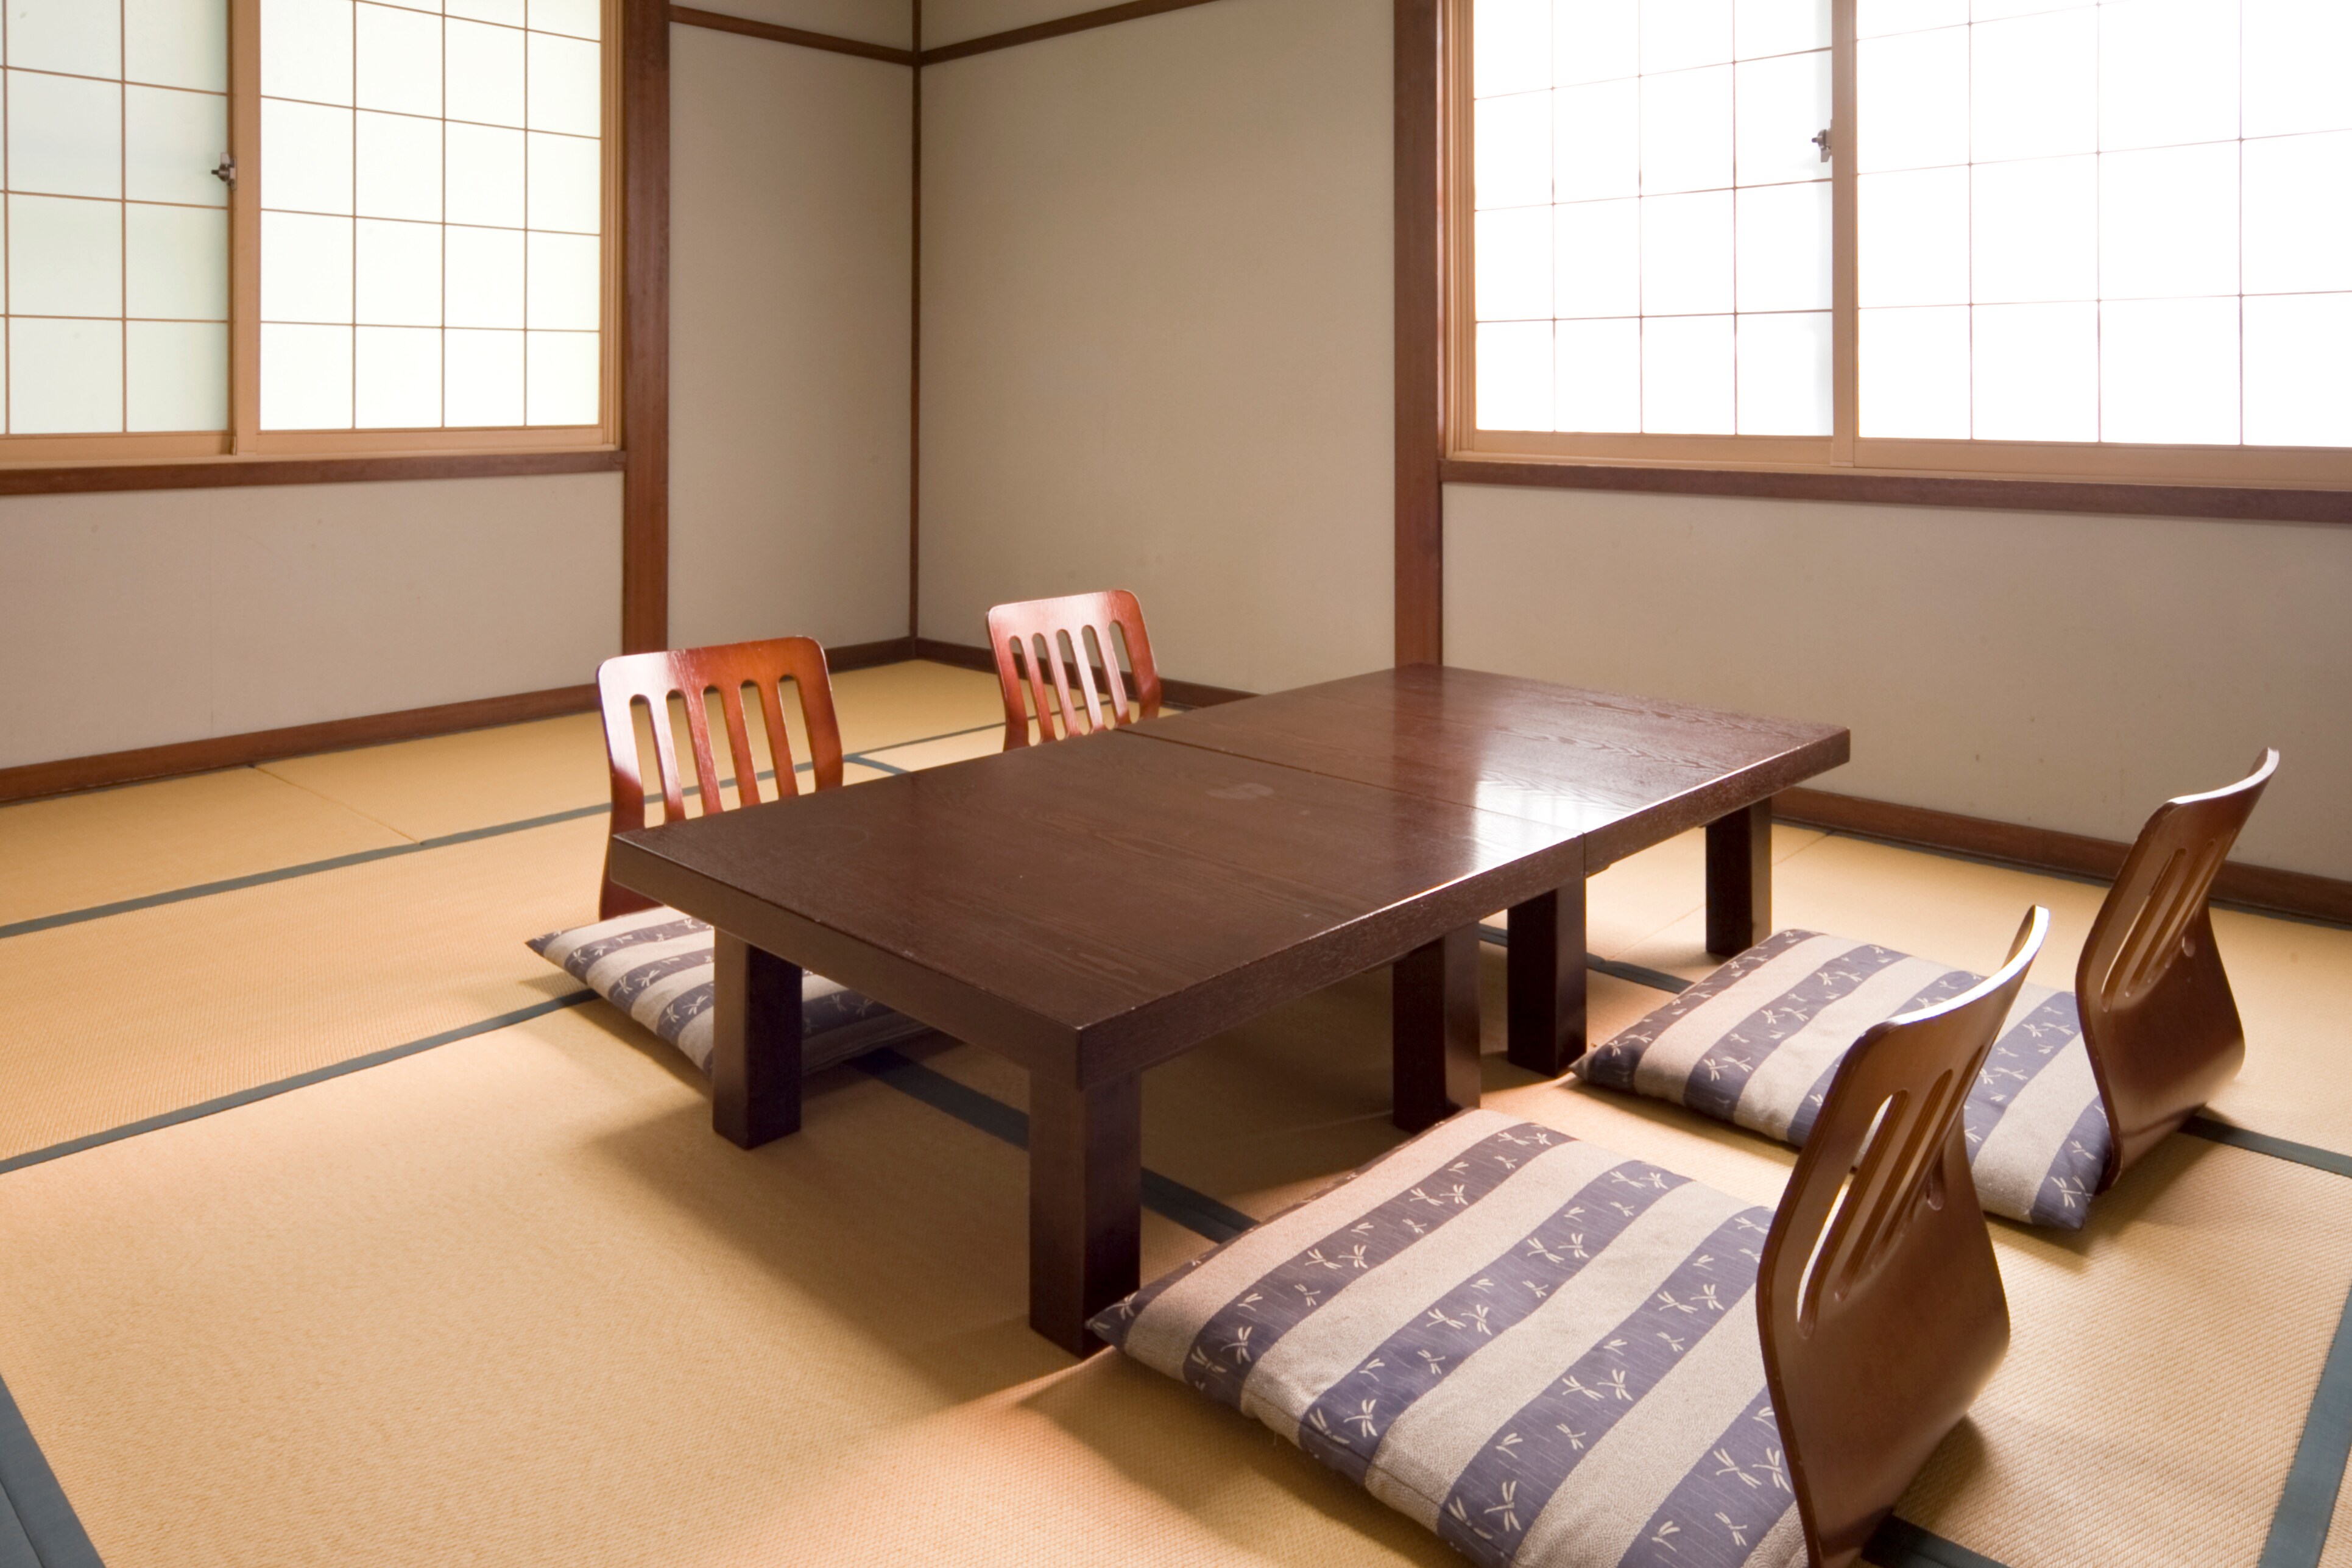 Only one Japanese-style room